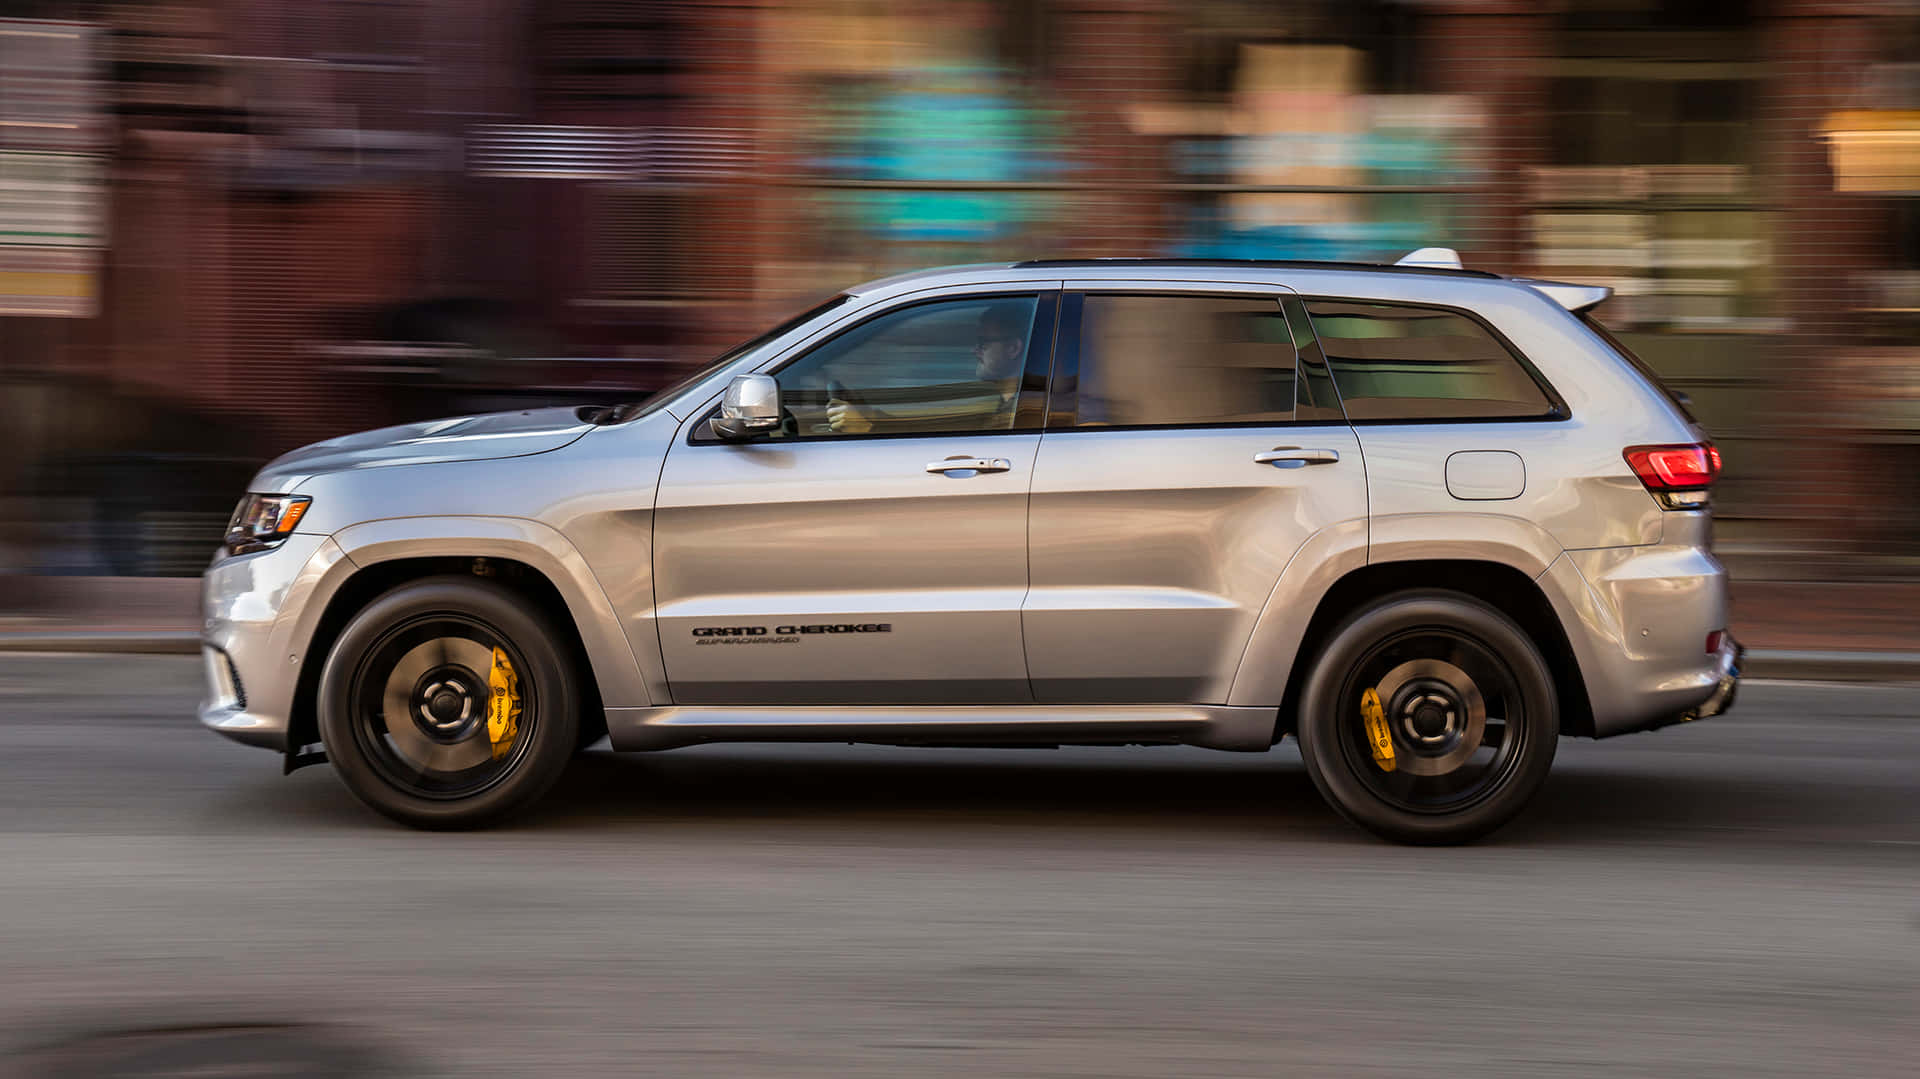 Get Ready for an Epic Ride in the Jeep TrackHawk Wallpaper